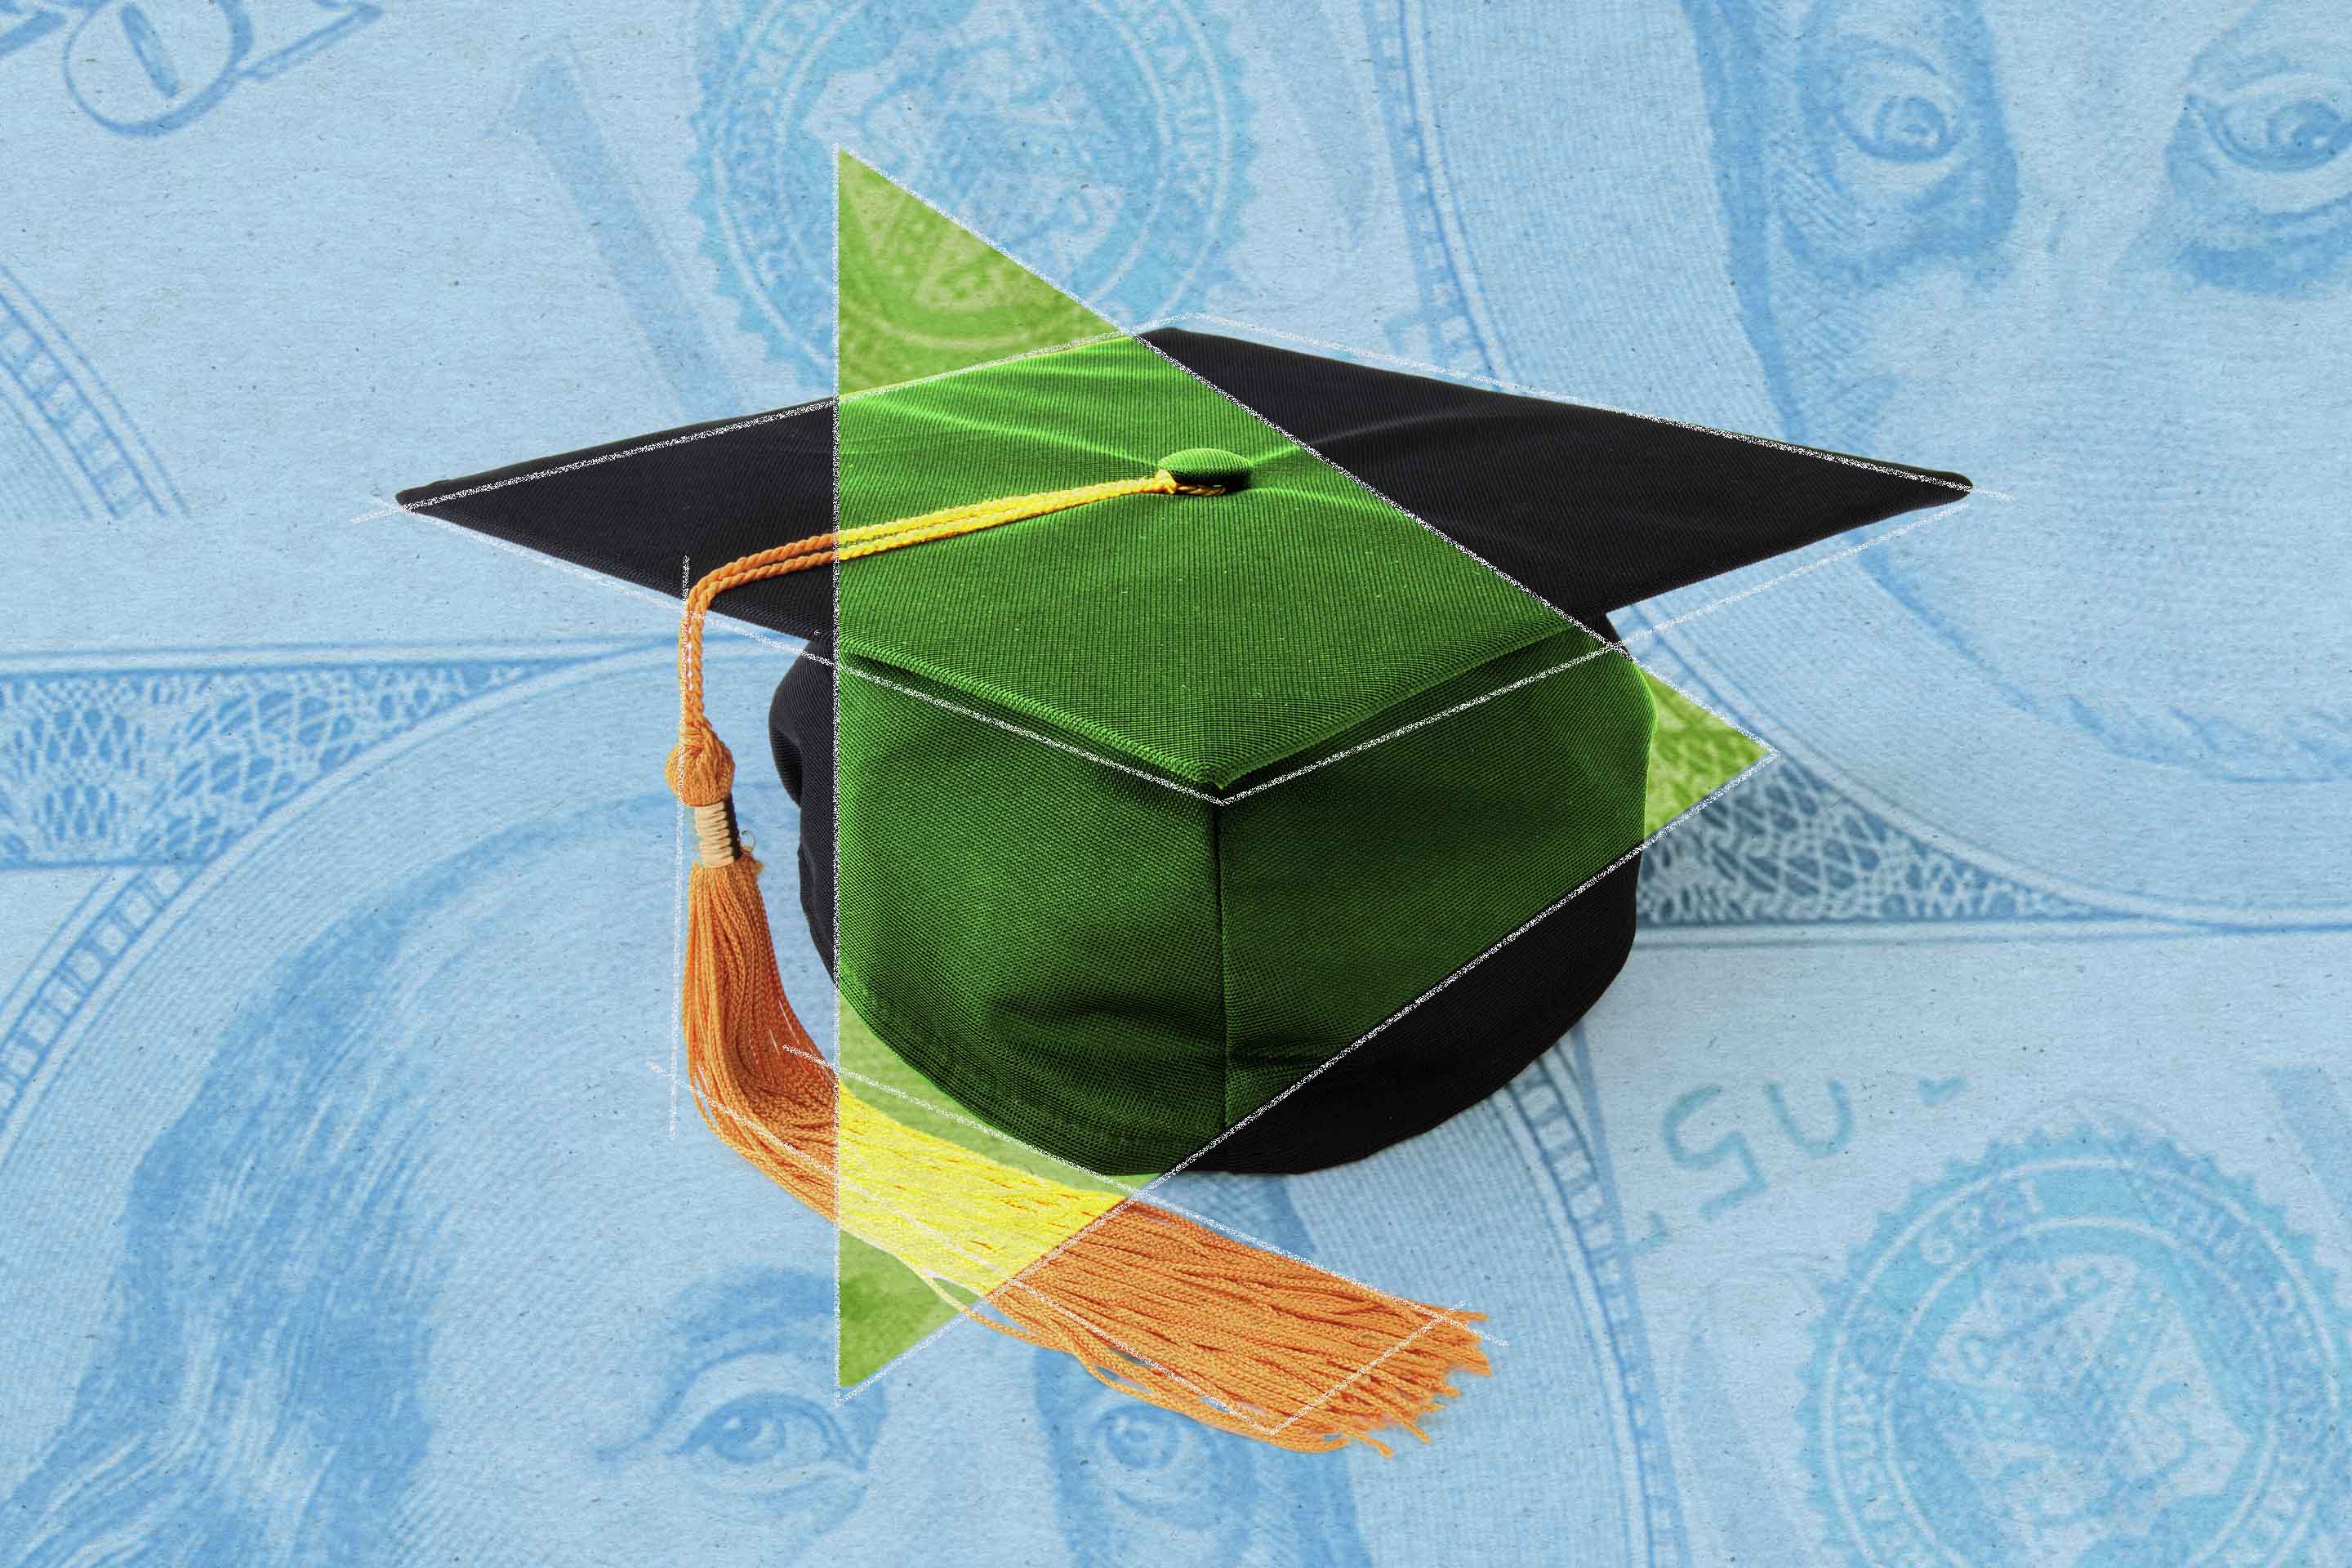 Student Loan Payments Are Back. Here's What Borrowers Need to Know